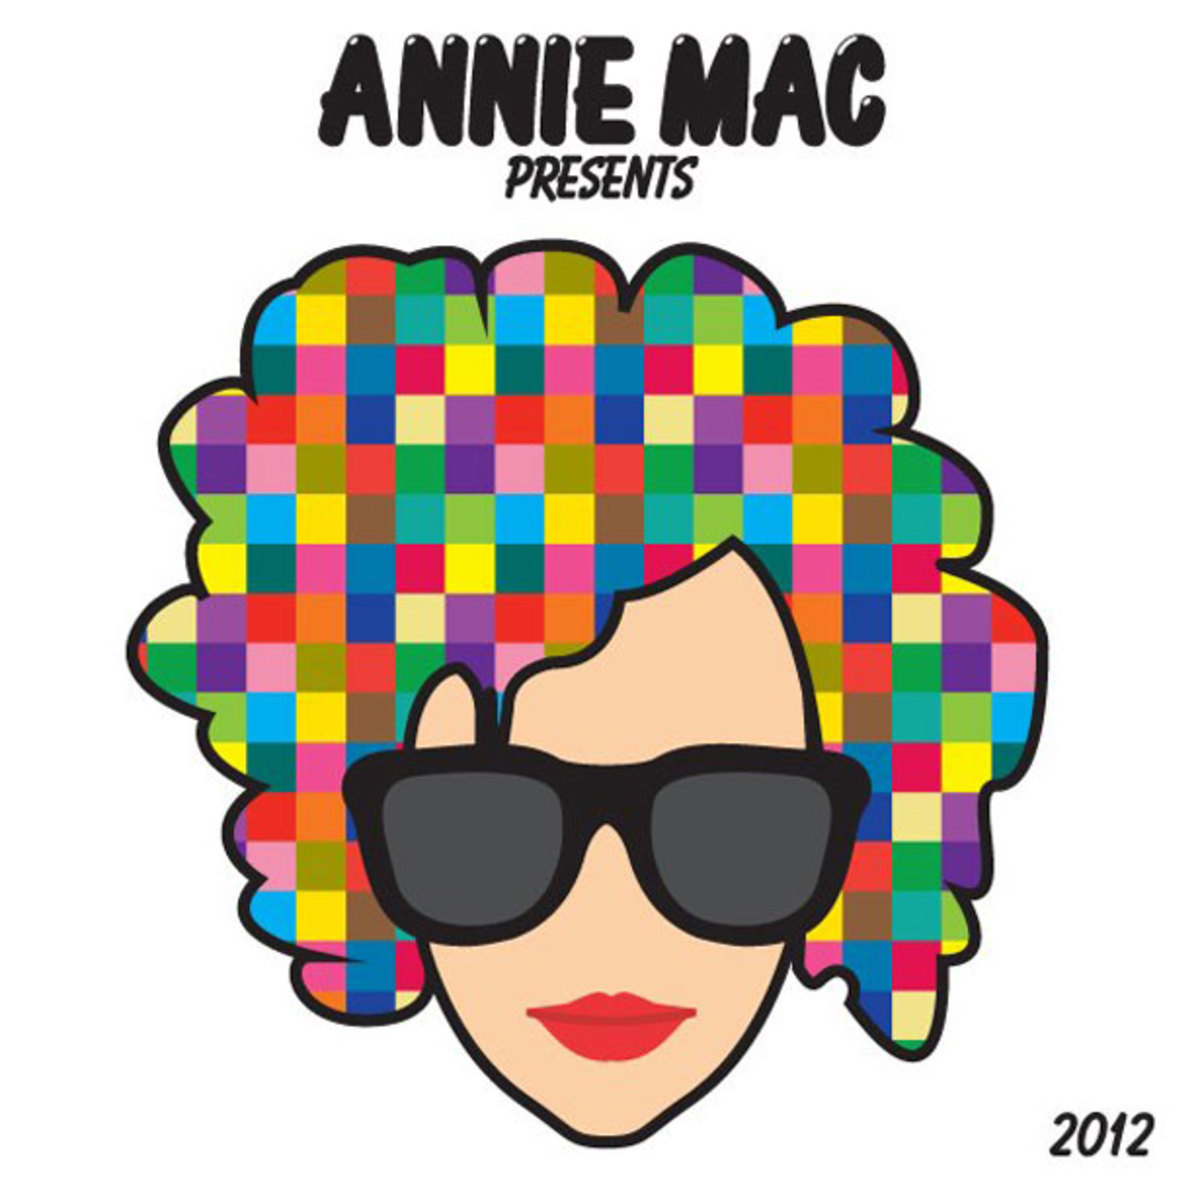 Free Download: Annie Mac Presents The Best of Free Music Monday